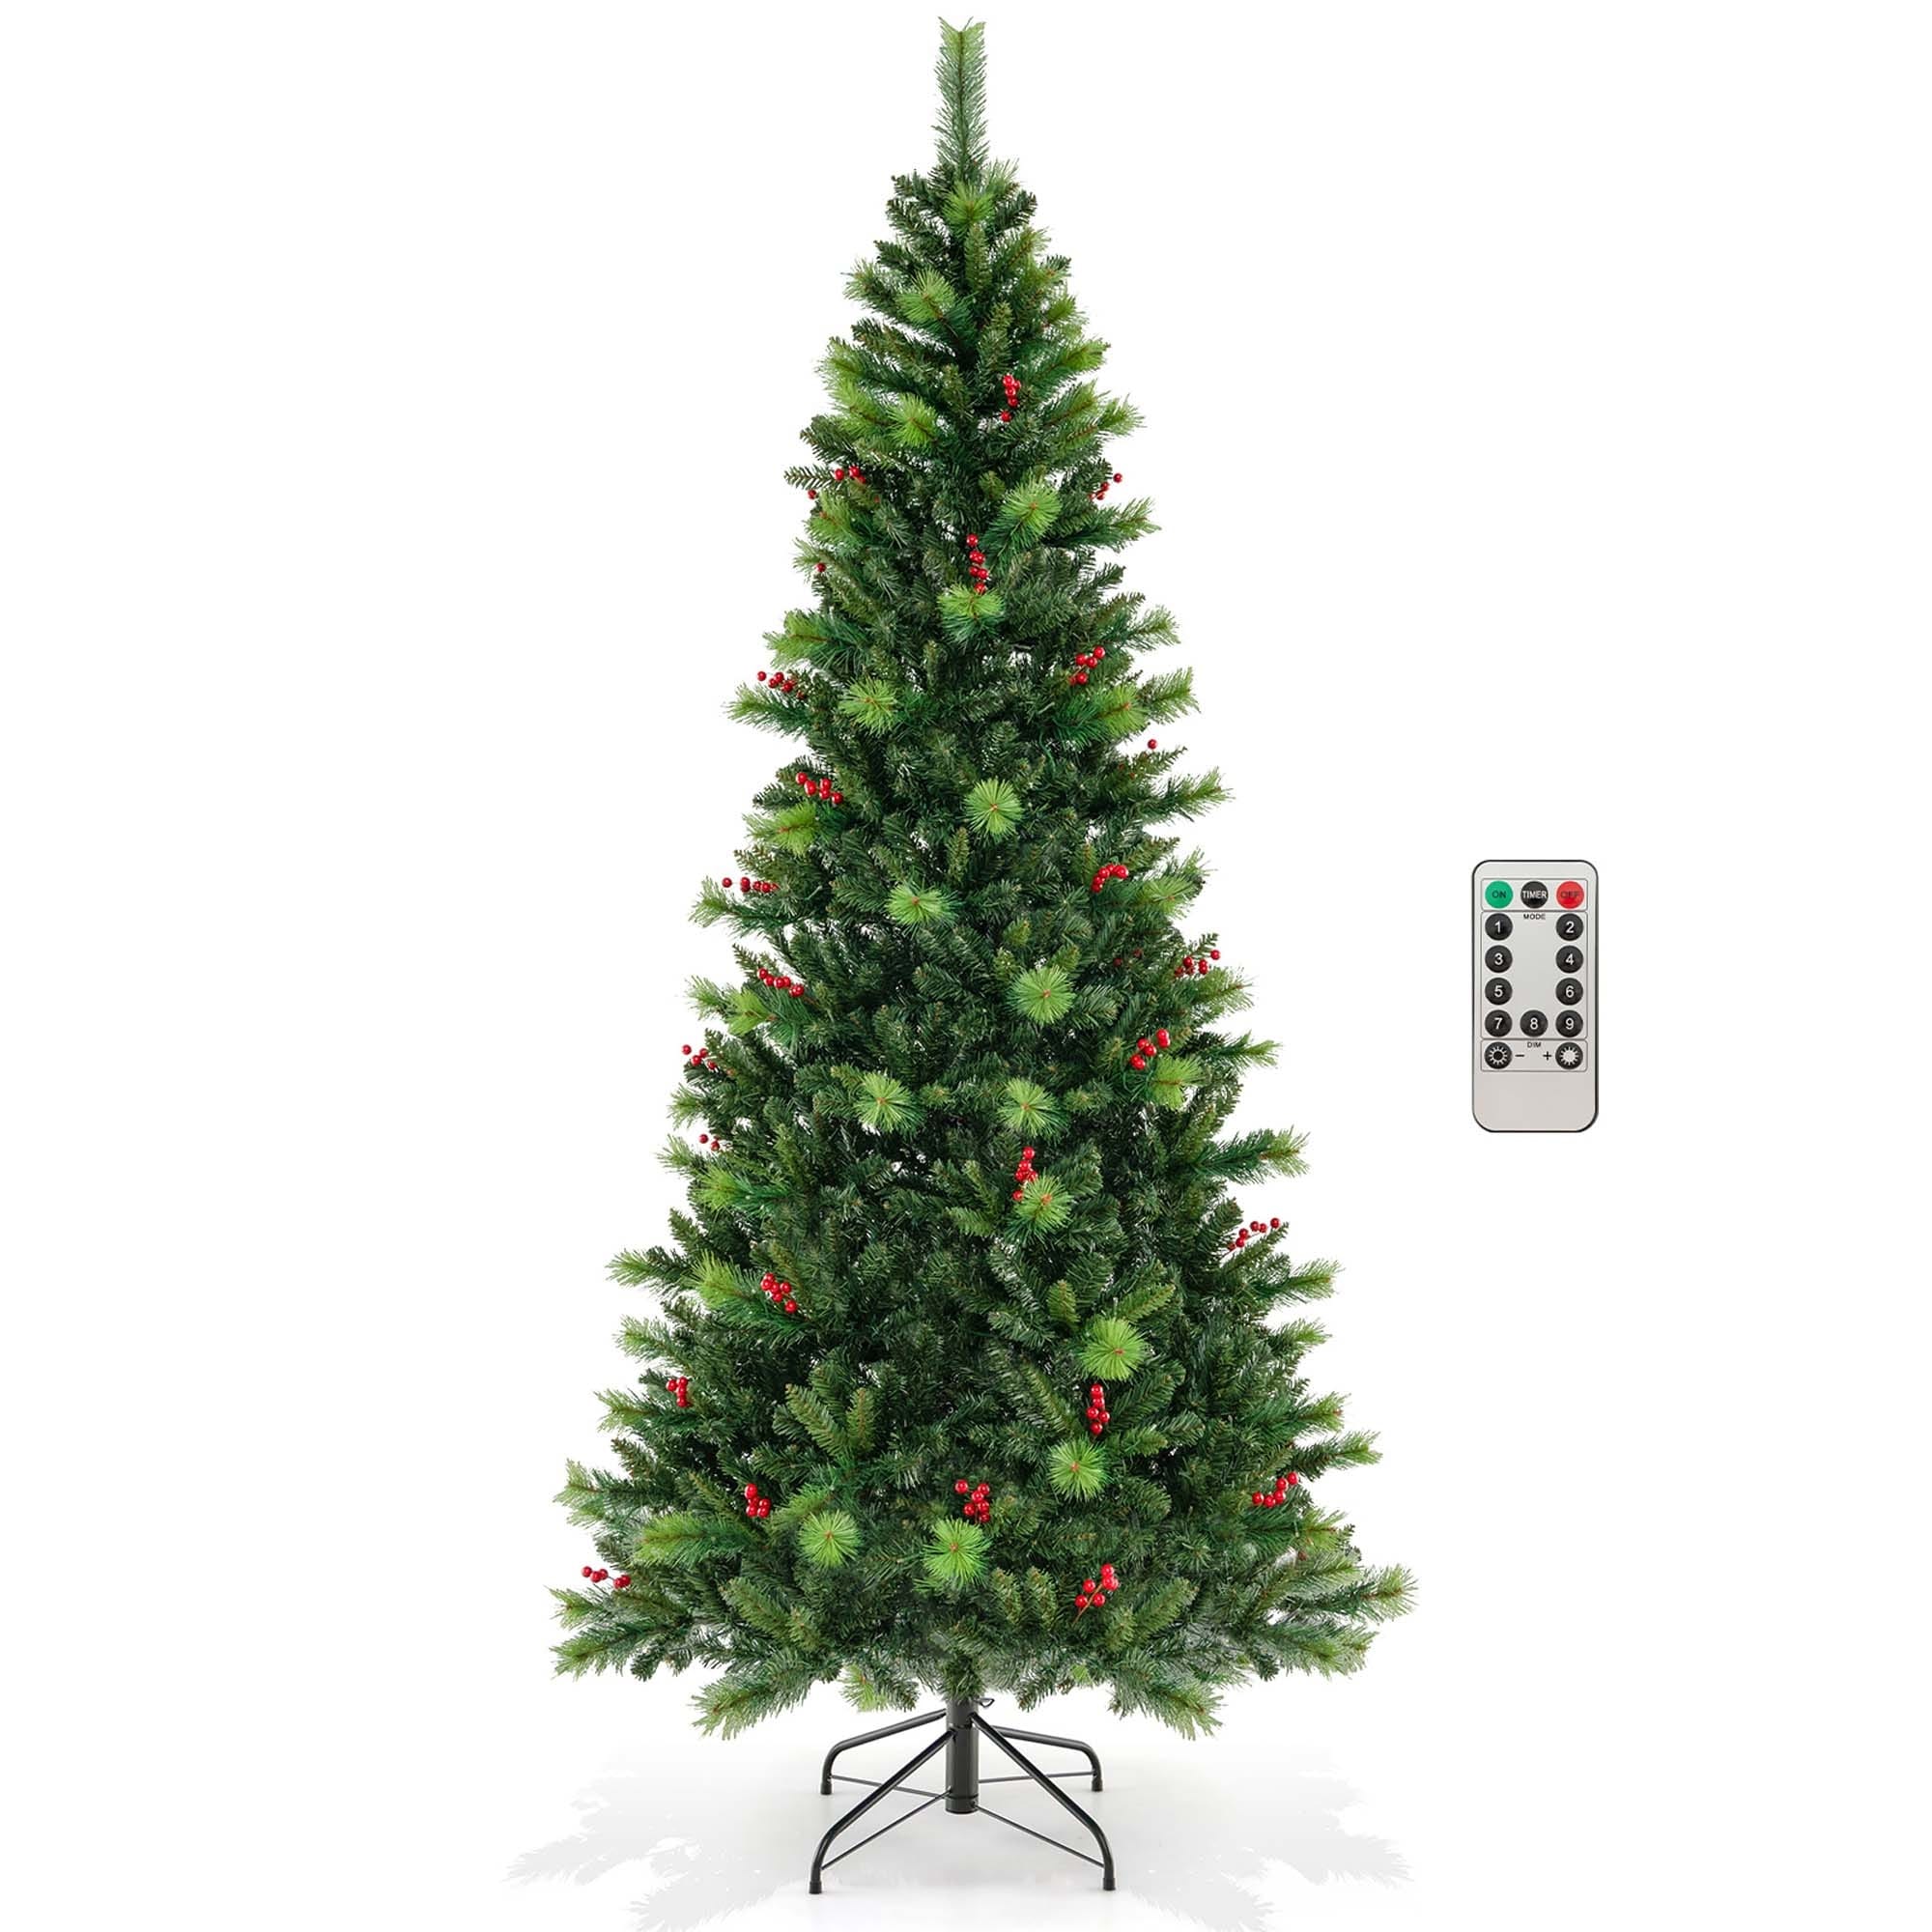 https://ak1.ostkcdn.com/images/products/is/images/direct/66fe14d4567cd6fc7b028cbe954aac5e632b09f4/Costway-6FT-7FT-8FT-Pre-Lit-Artificial-Christmas-Tree-9-Lighting-Modes.jpg